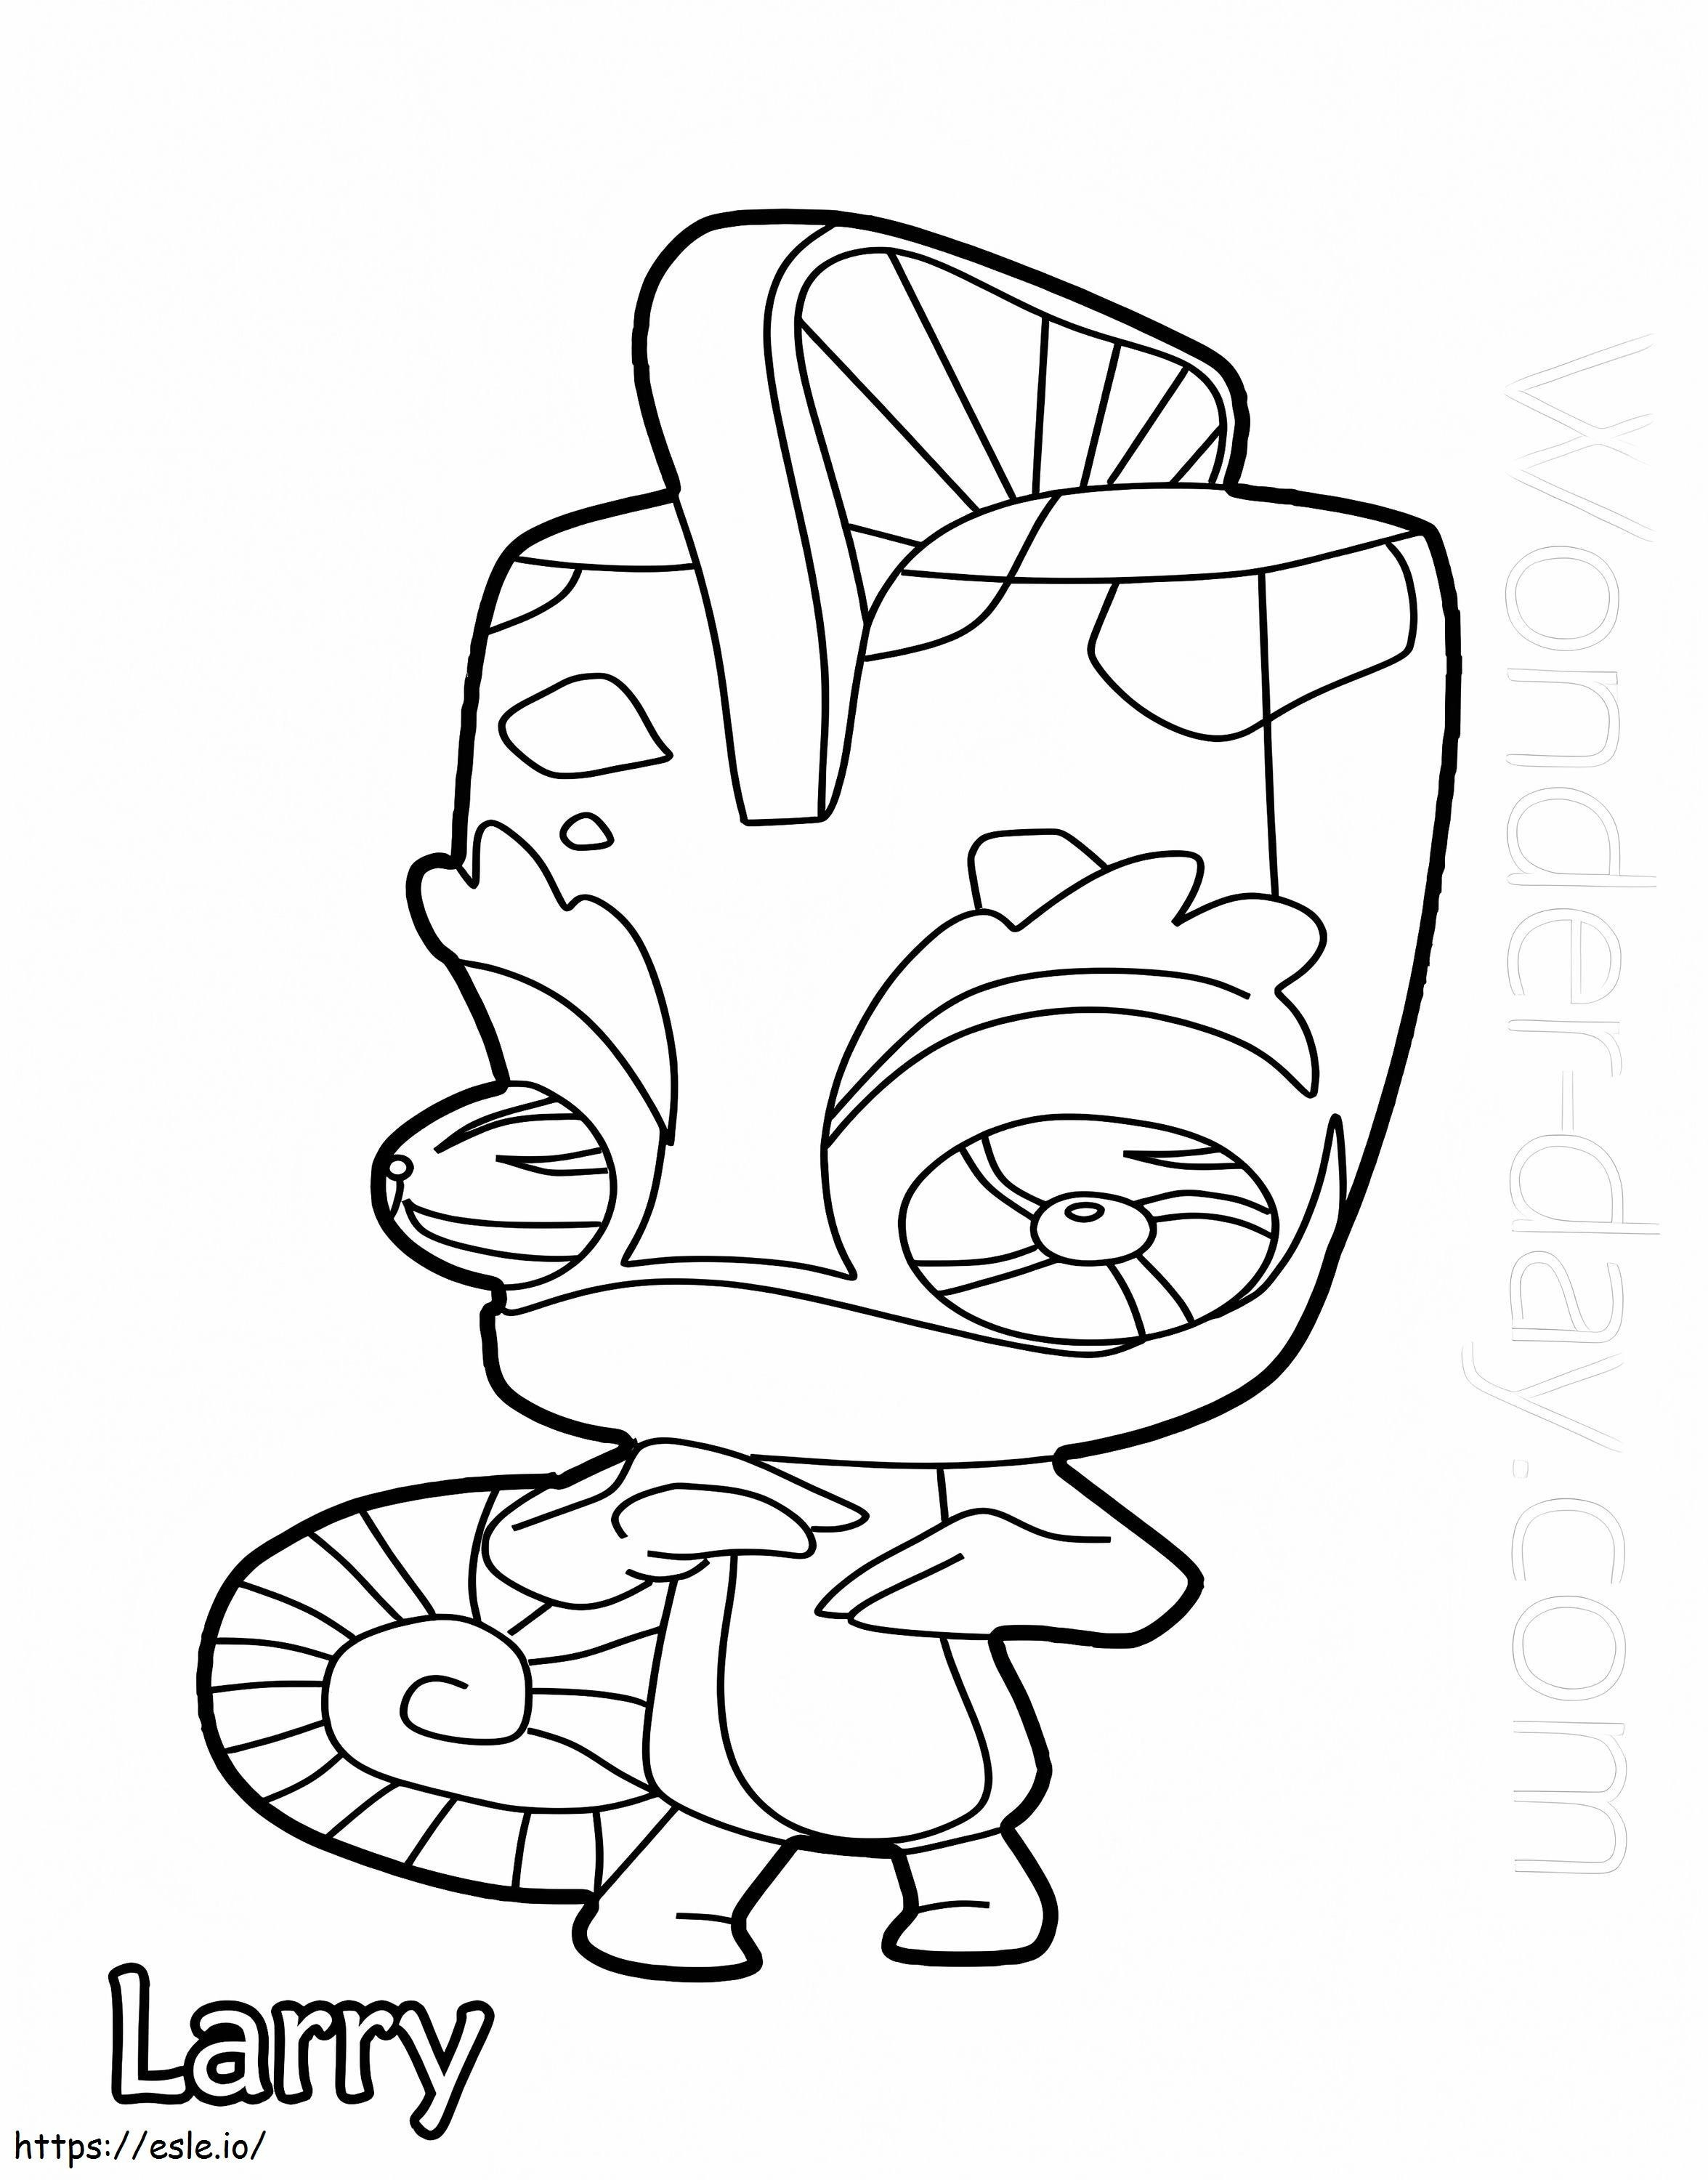 Larry Zooba coloring page